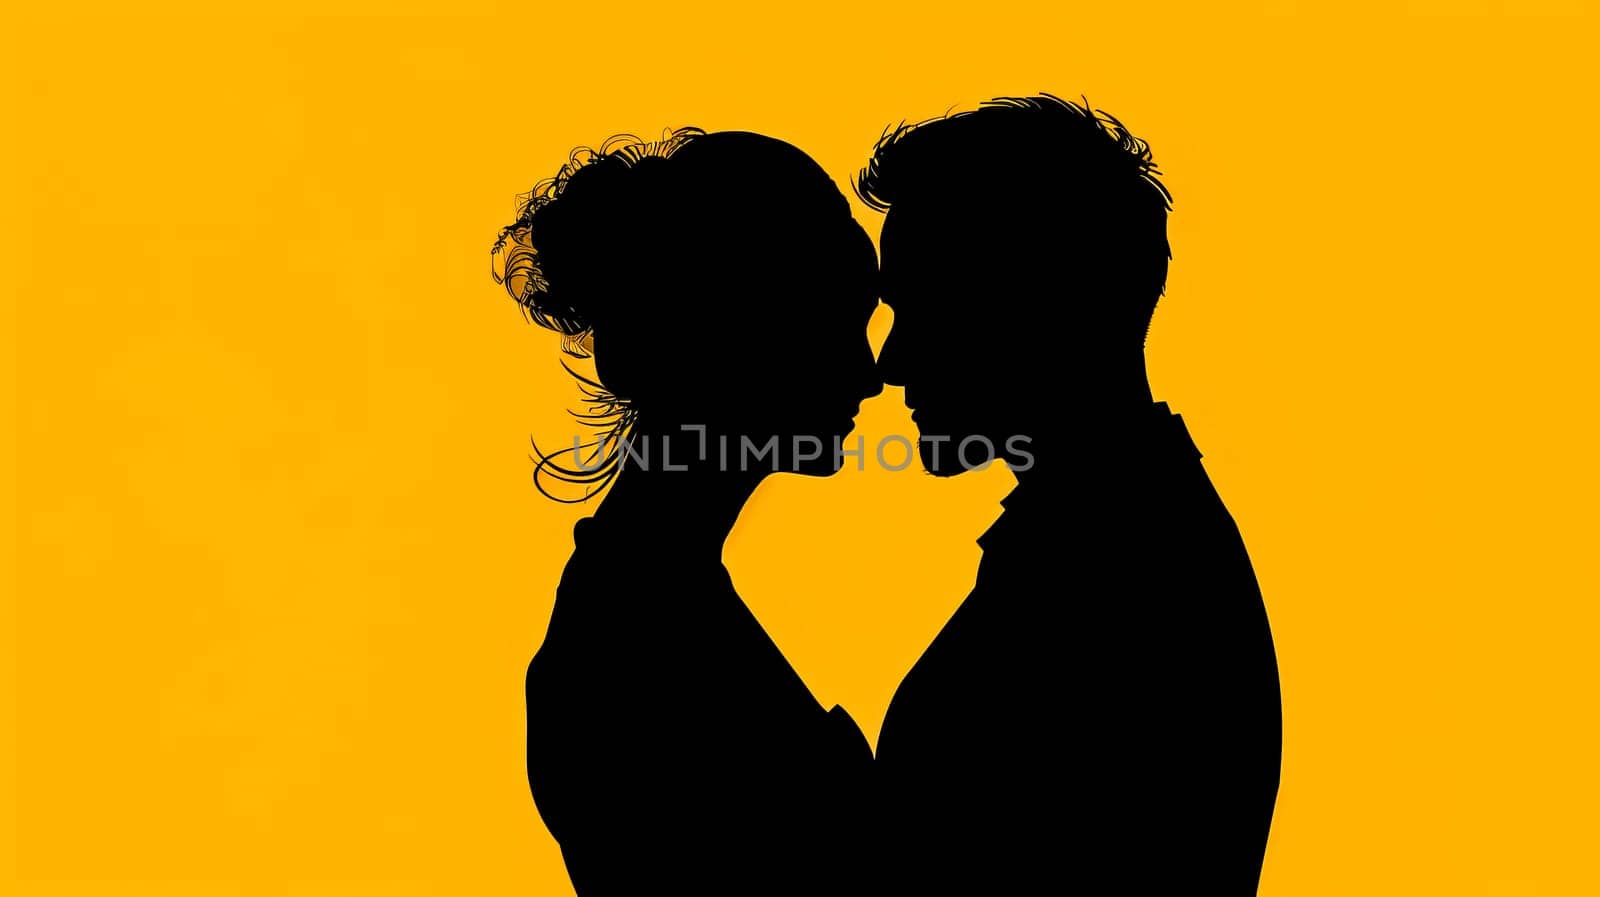 Romantic silhouette of couple against yellow background by Edophoto